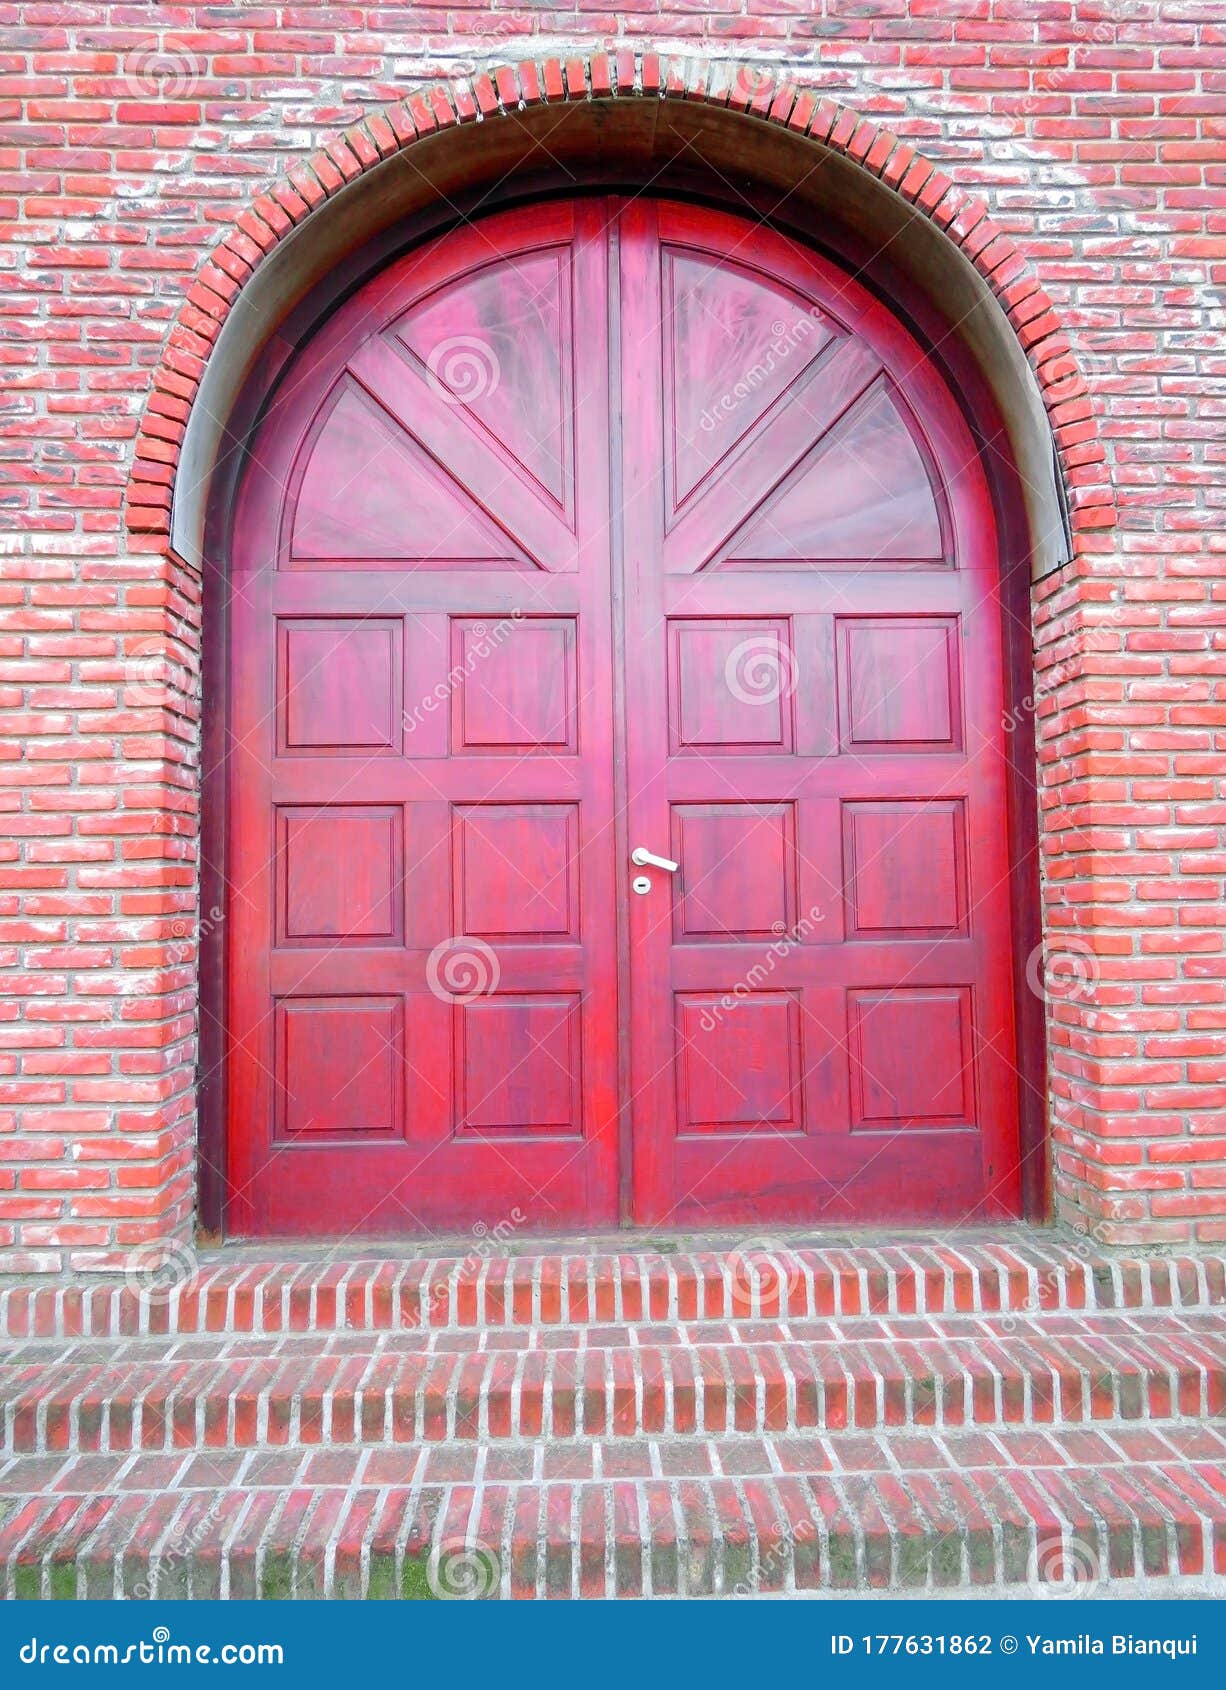 large red doorway with red brick wall or steps